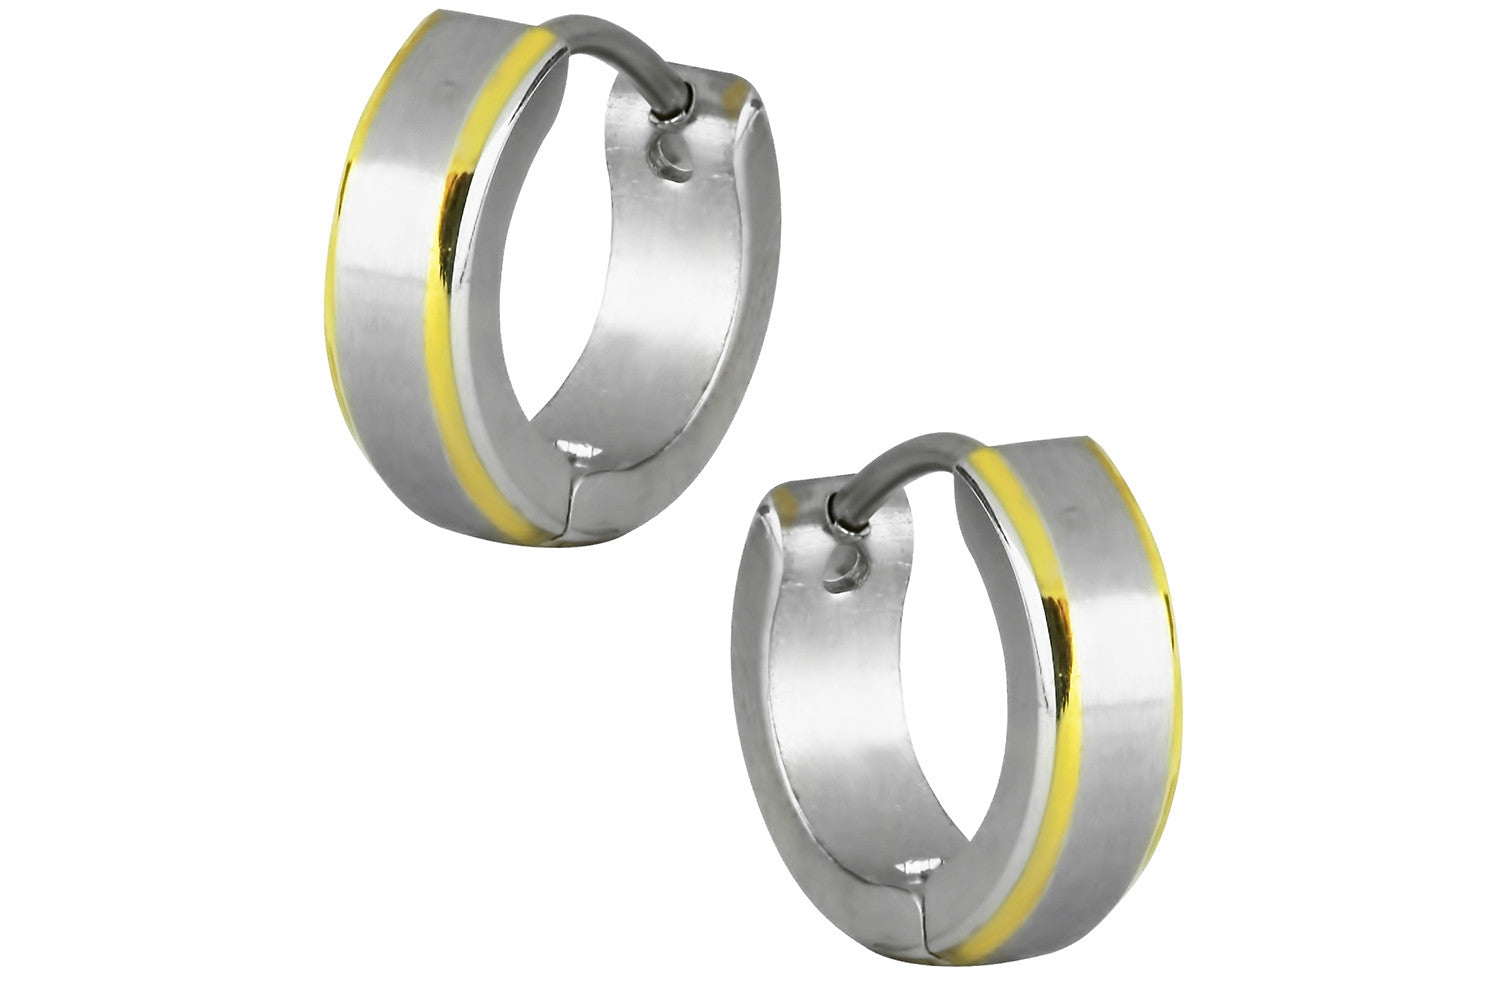 These Stainless Steel men's hoop earrings are nickel free and hypoallergenic. They measure 1/2 inch tall and 4 mm wide.